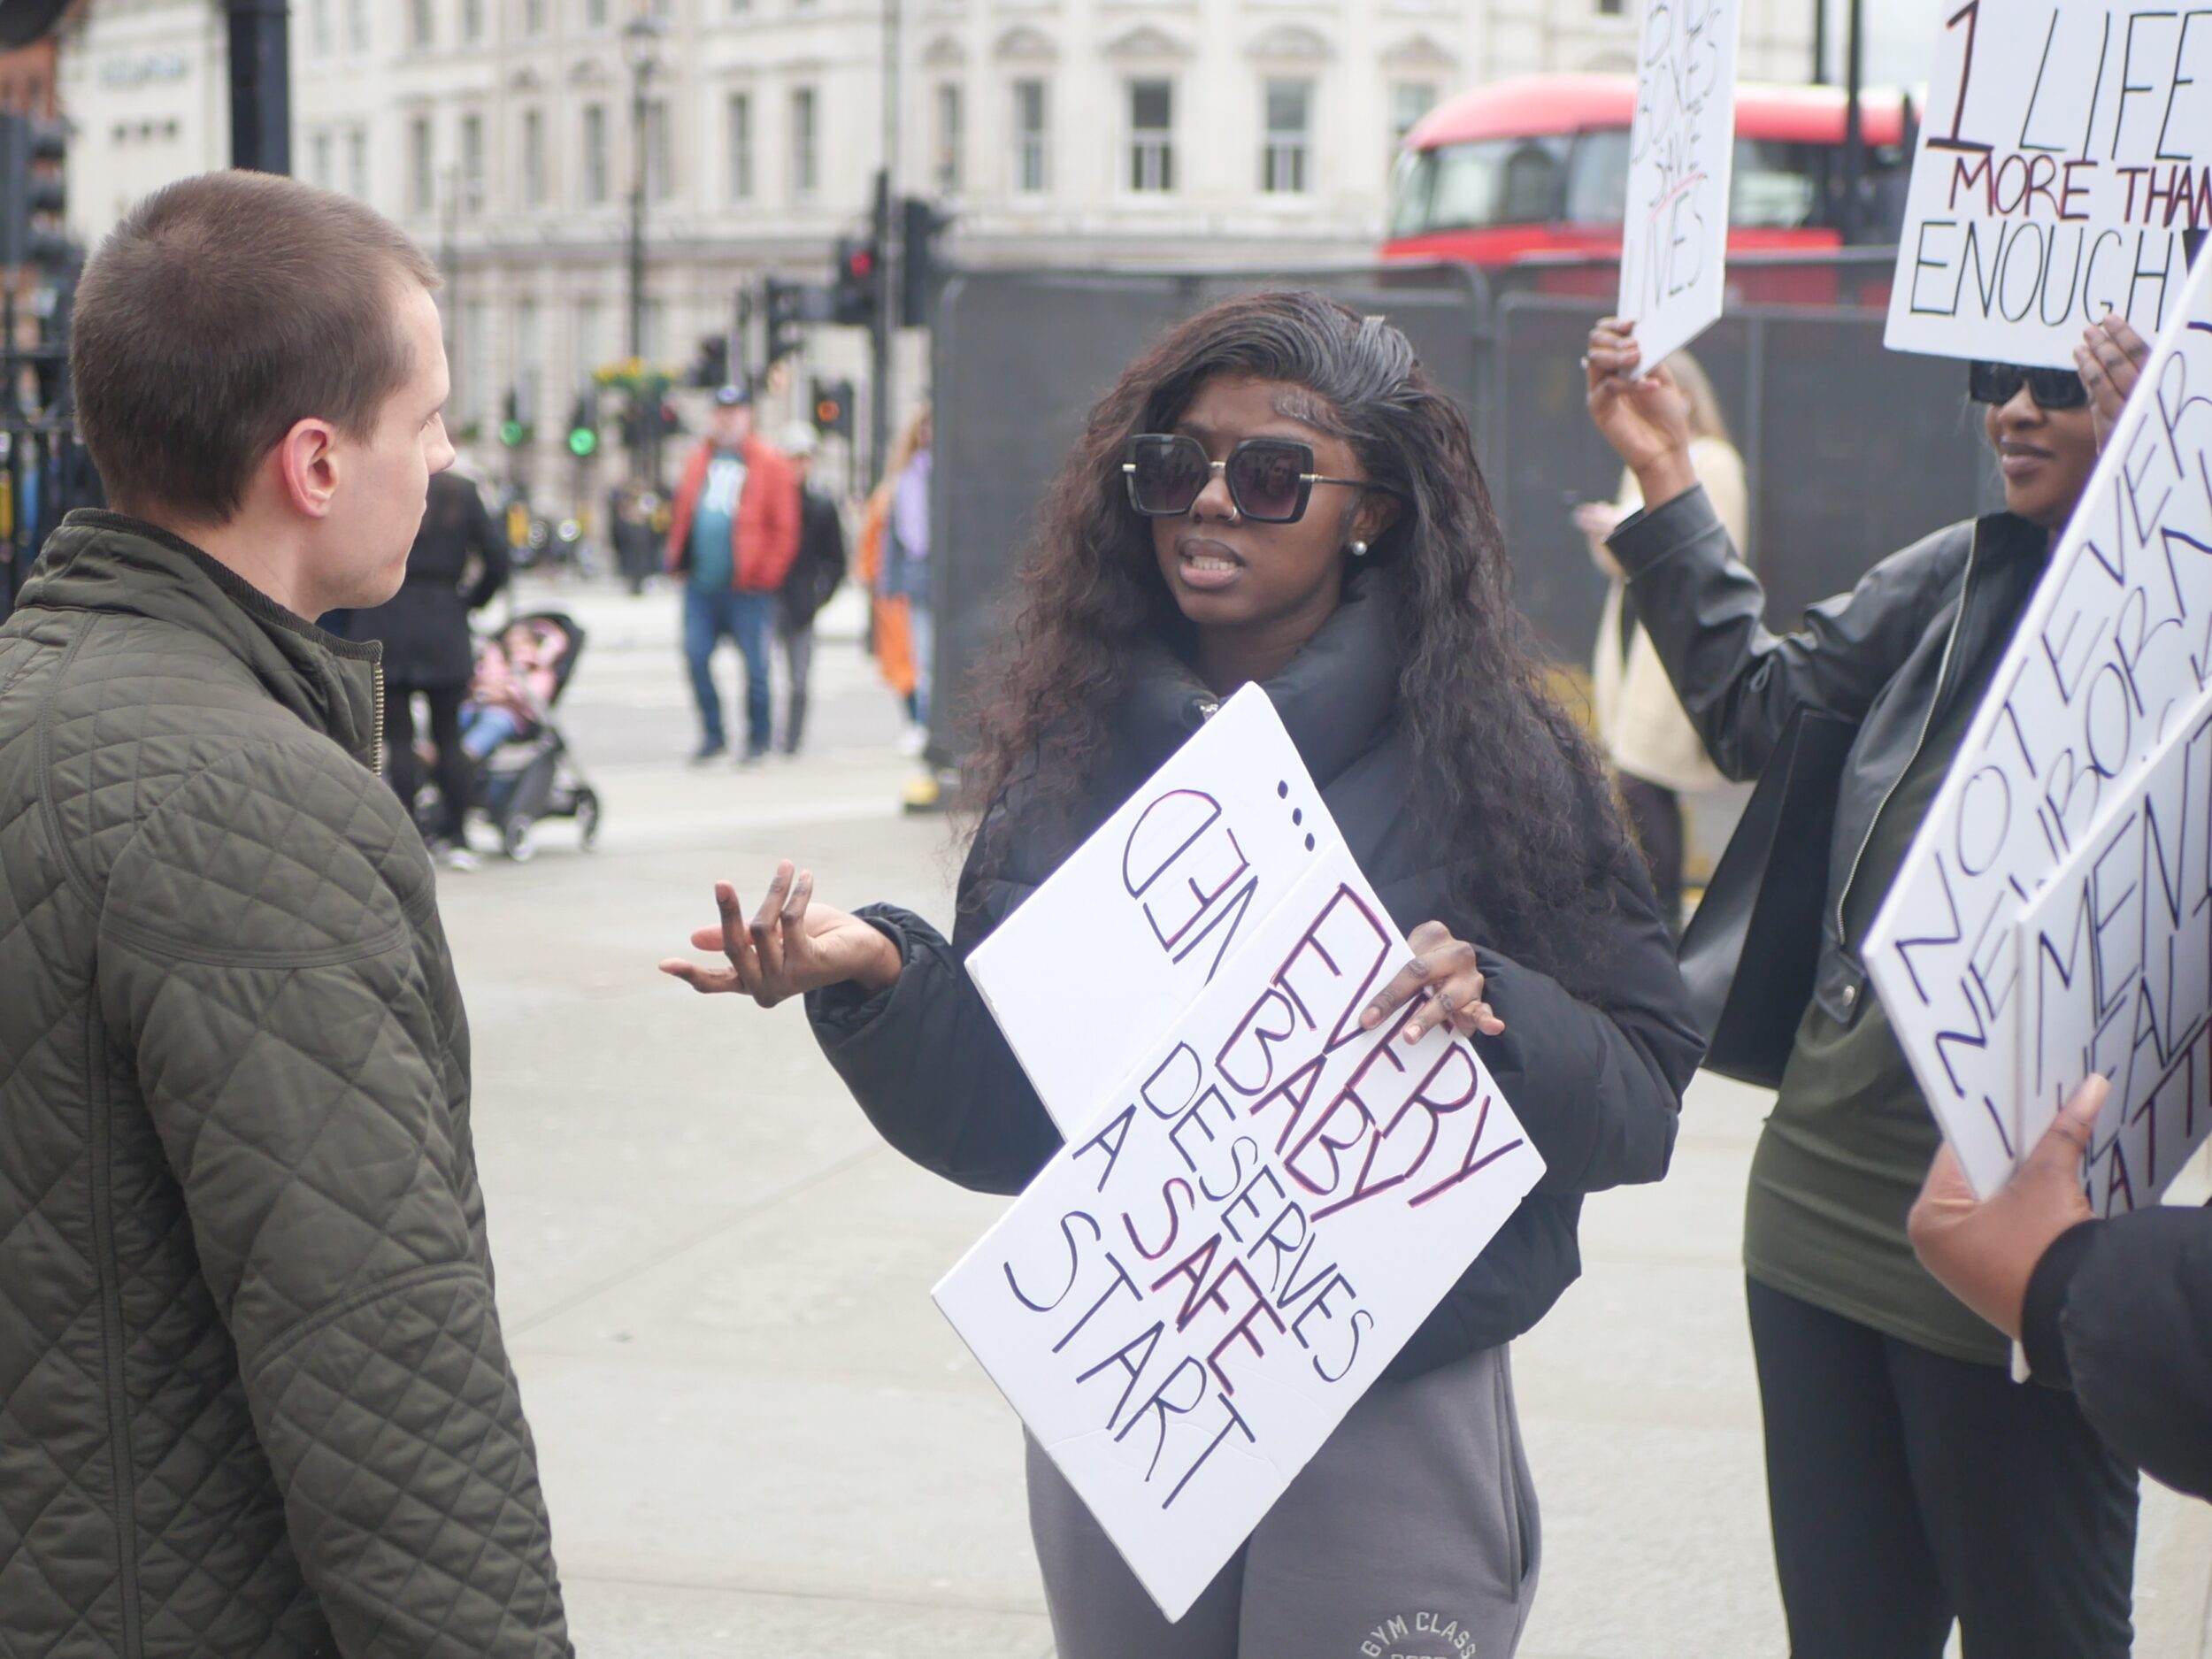 Campaigners on Trafalgar Square with placards calling for the implementation of baby boxes in London. Toyin is leading the chanting at the front.